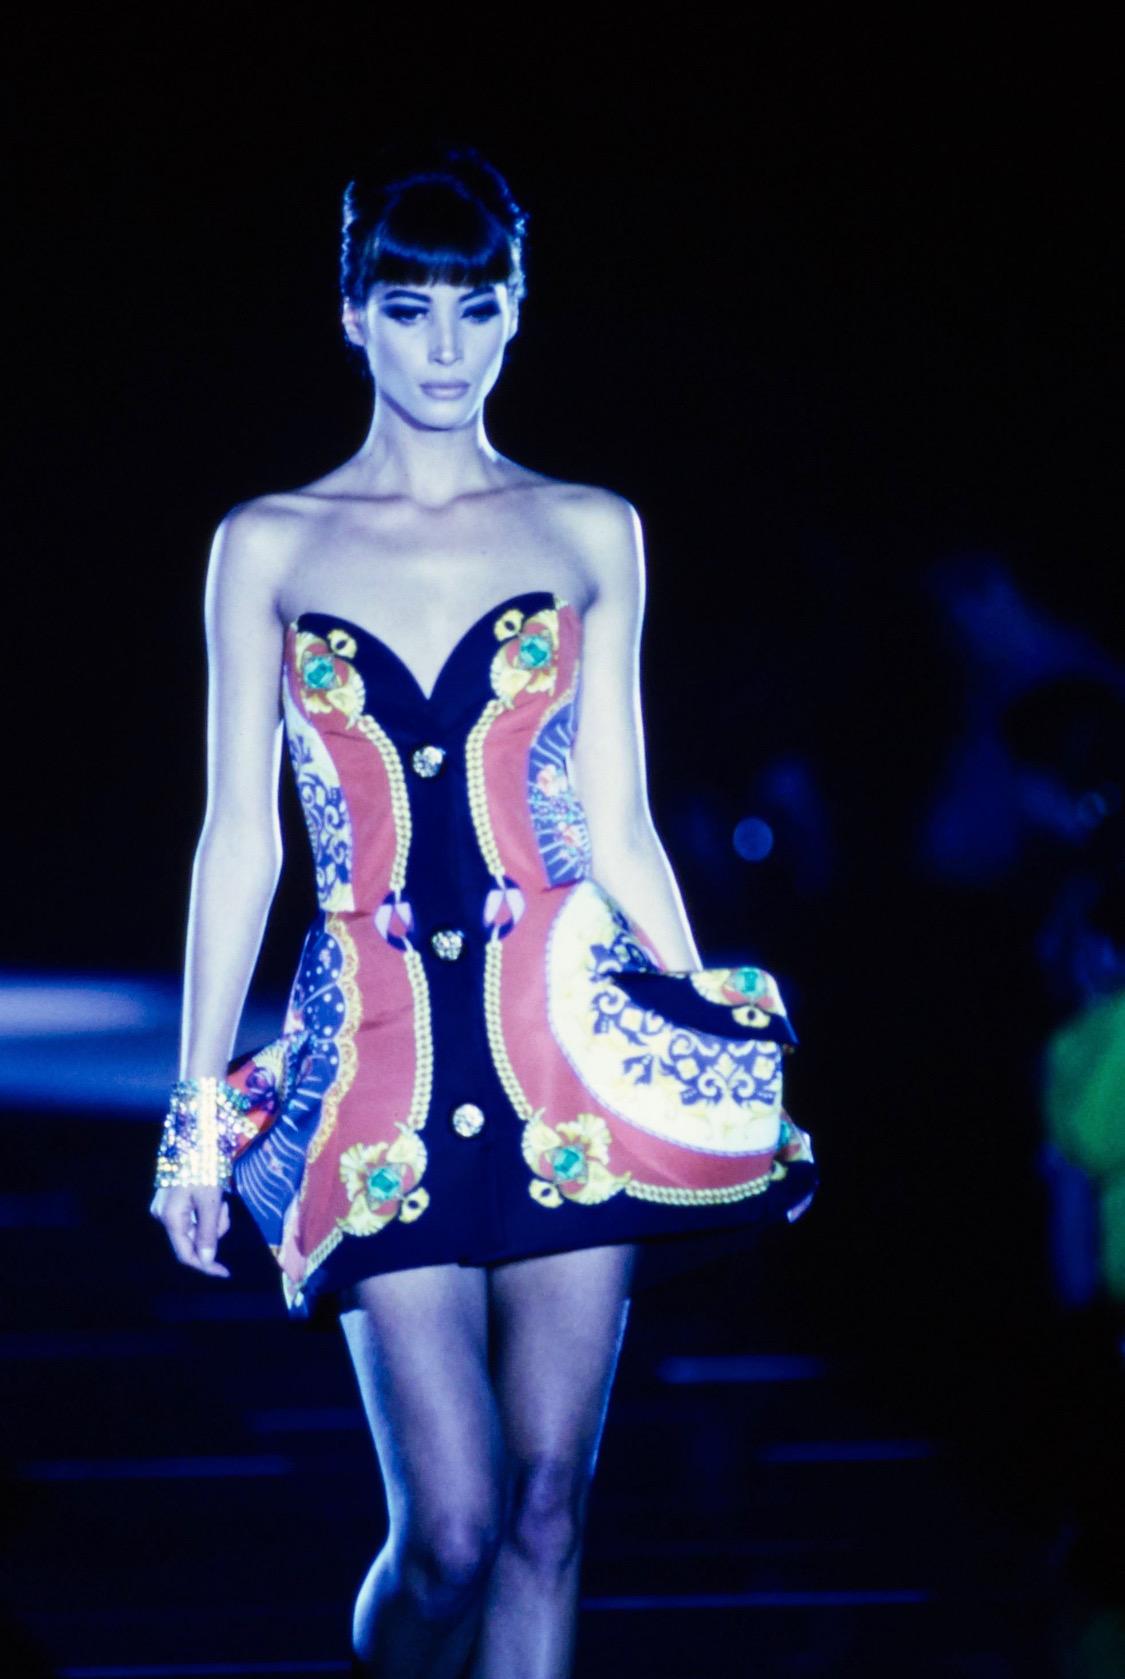 Presenting a stunning multicolored silk fan print Gianni Versace Couture dress, designed by Gianni Versace. From the Spring/Summer 1991 collection, this fan motif debuted on the season's runway and was also used in the season's ad campaign. This